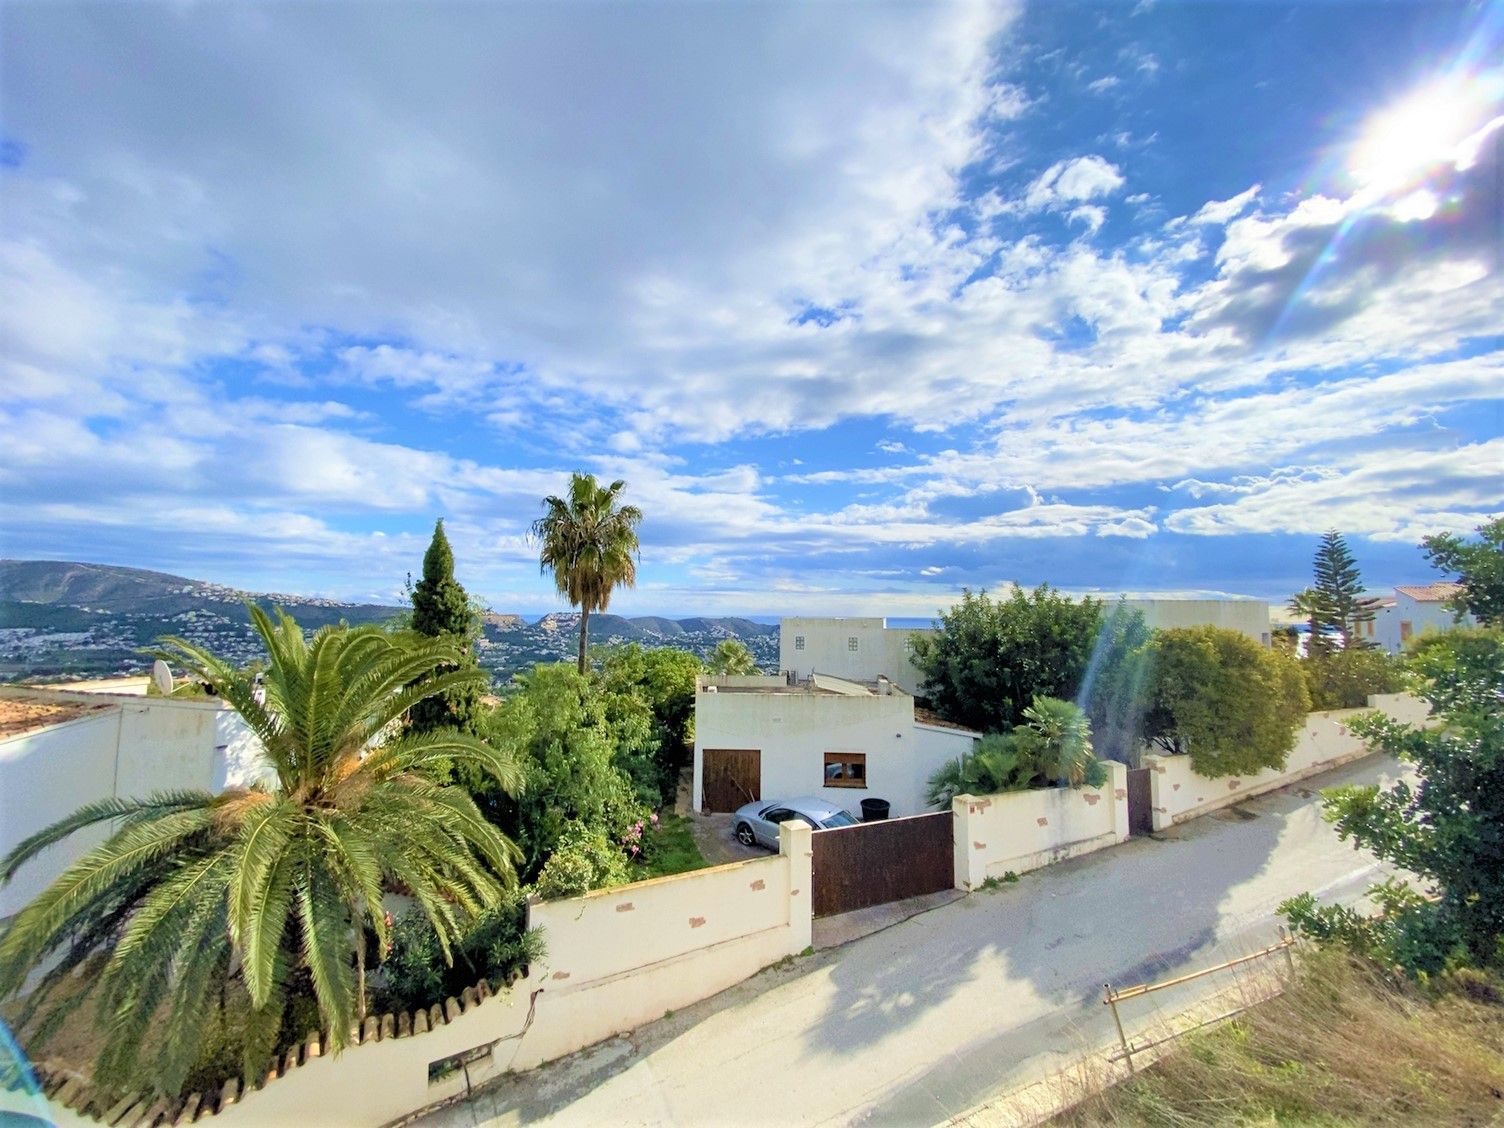 Plot in Teulada, for sale